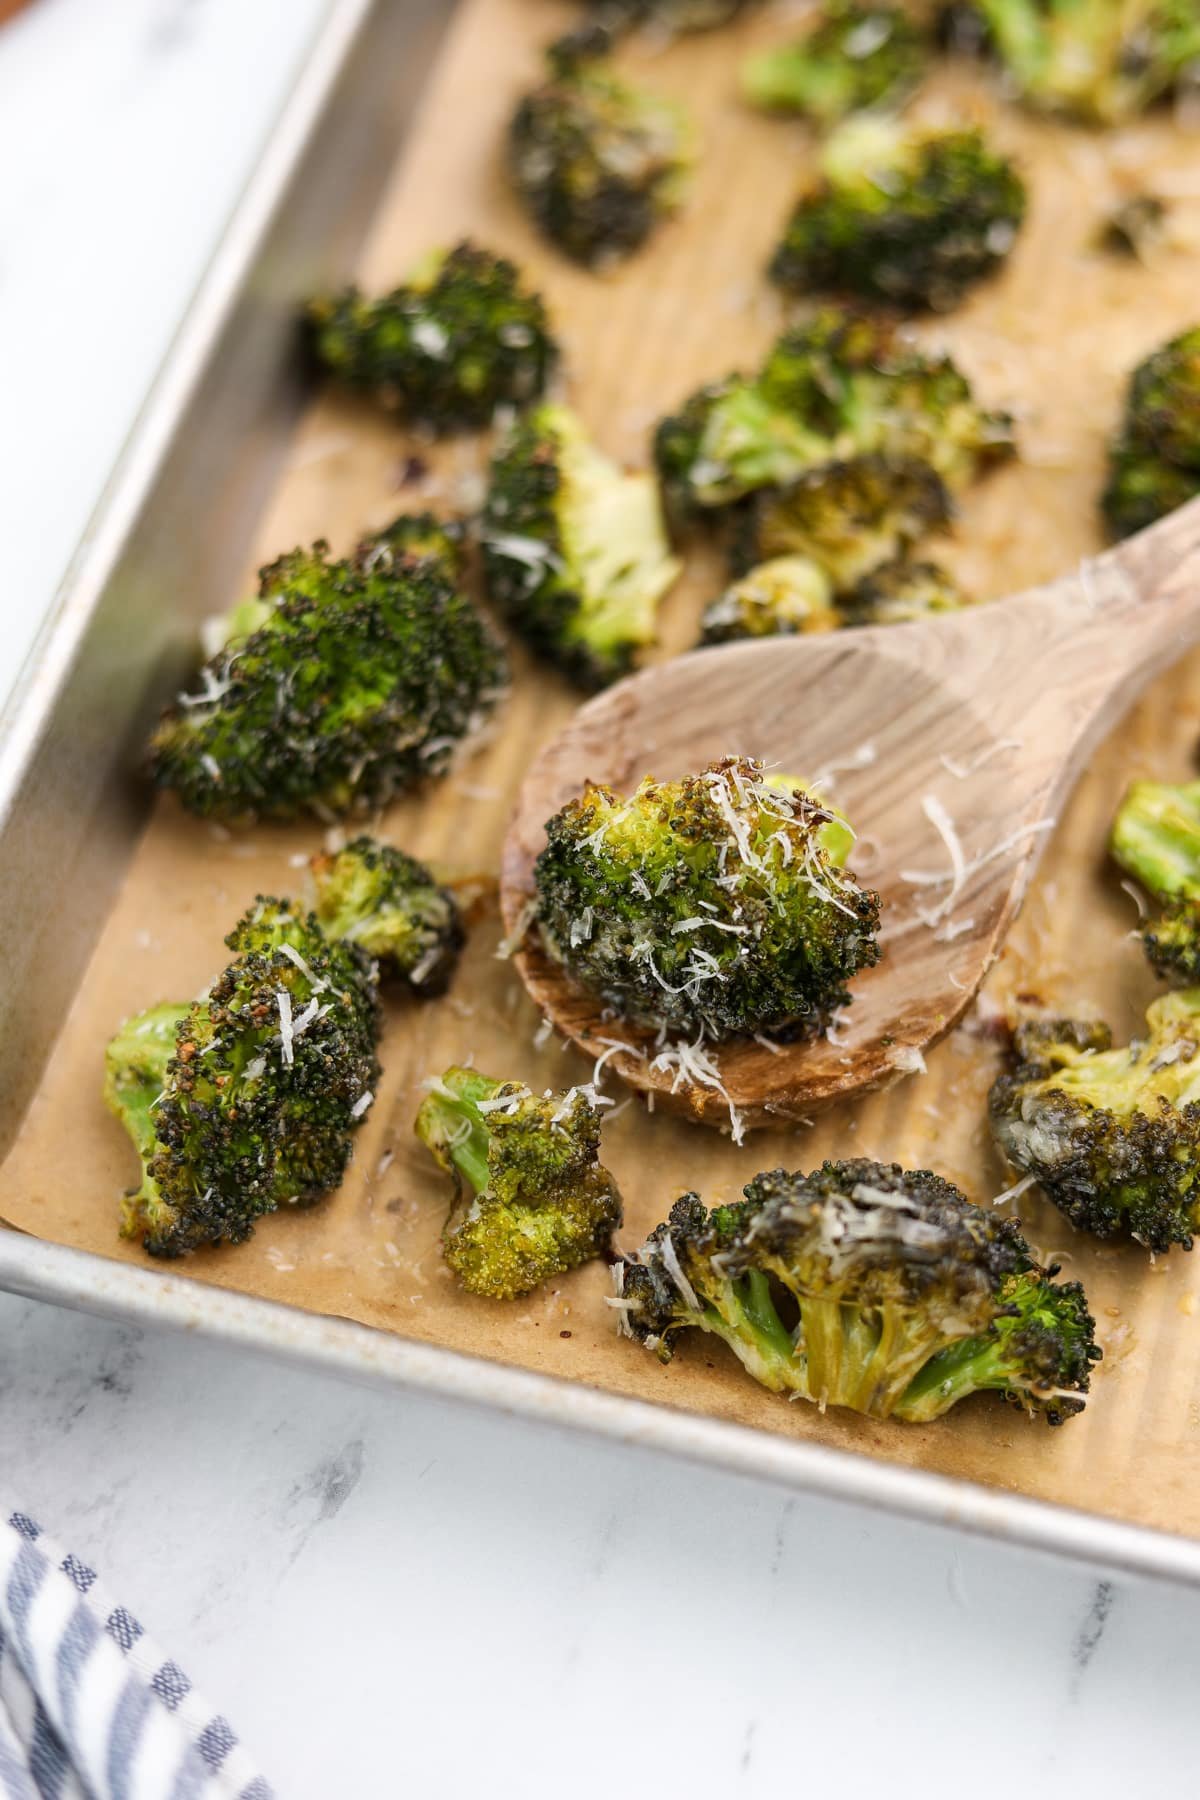 A wooden spoon taking a portion of roasted broccoli from a baking sheet.